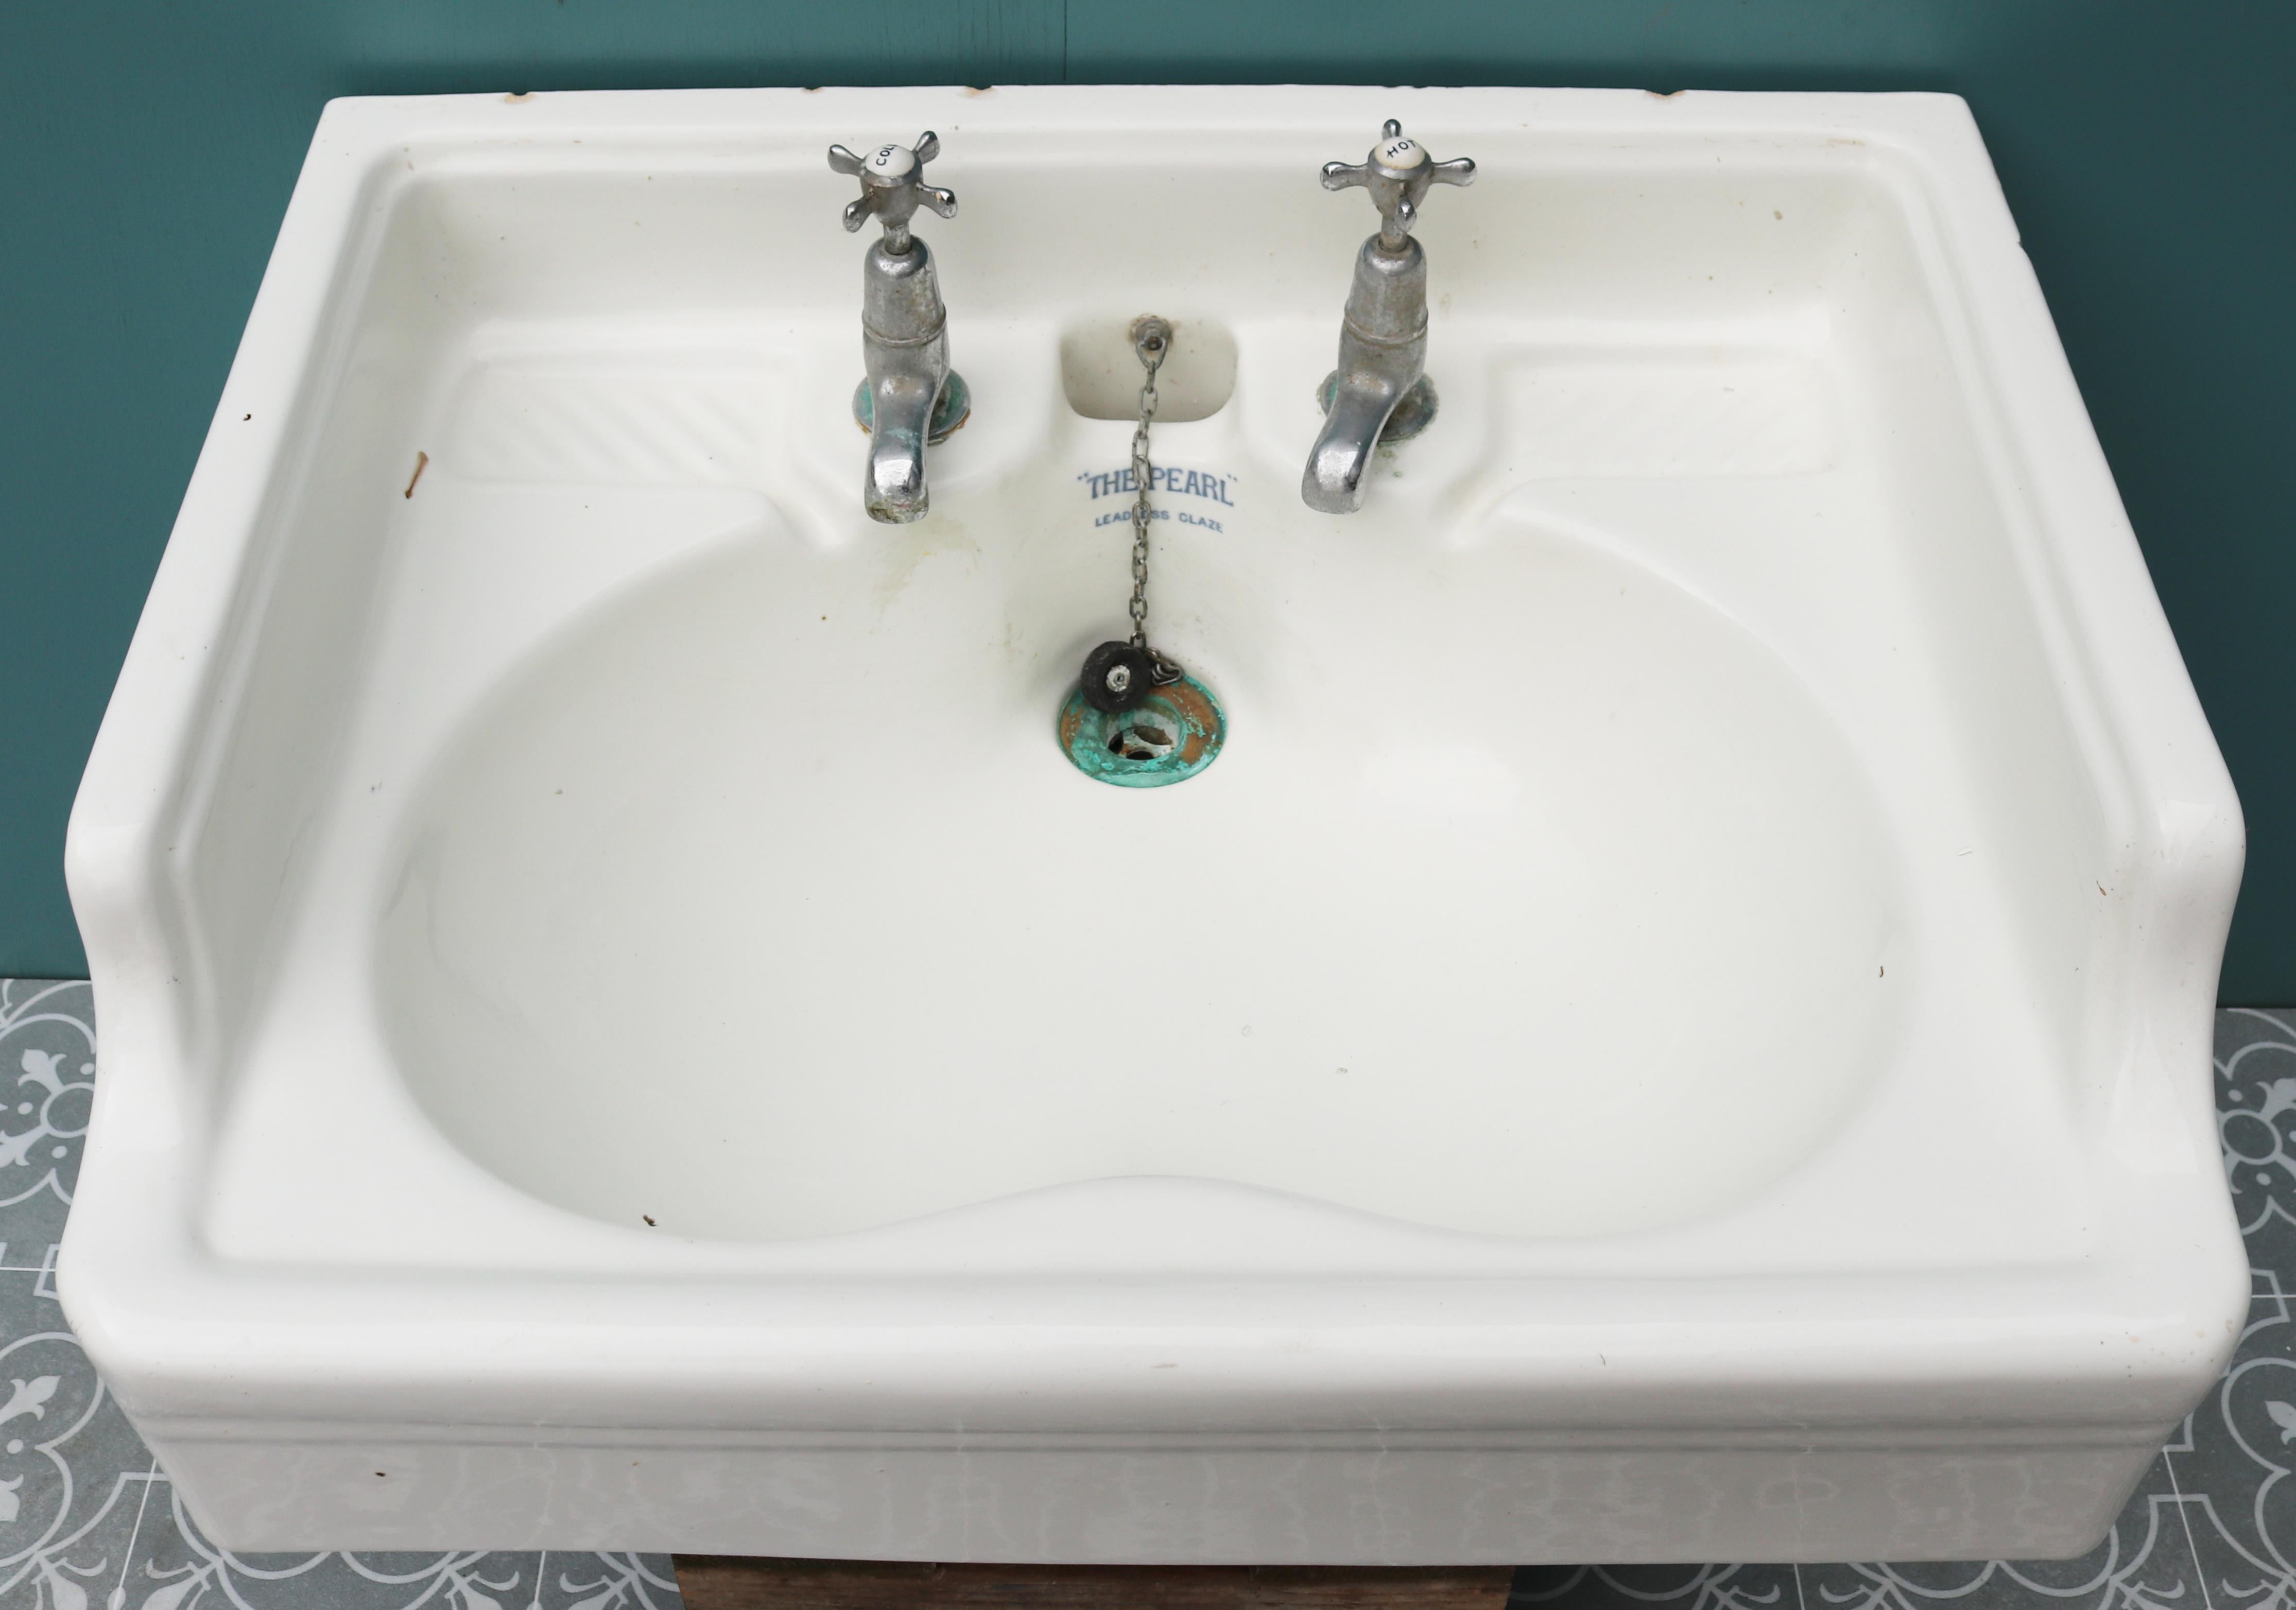 Reclaimed Bathroom Basin or Sink 'The Pearl' In Fair Condition For Sale In Wormelow, Herefordshire